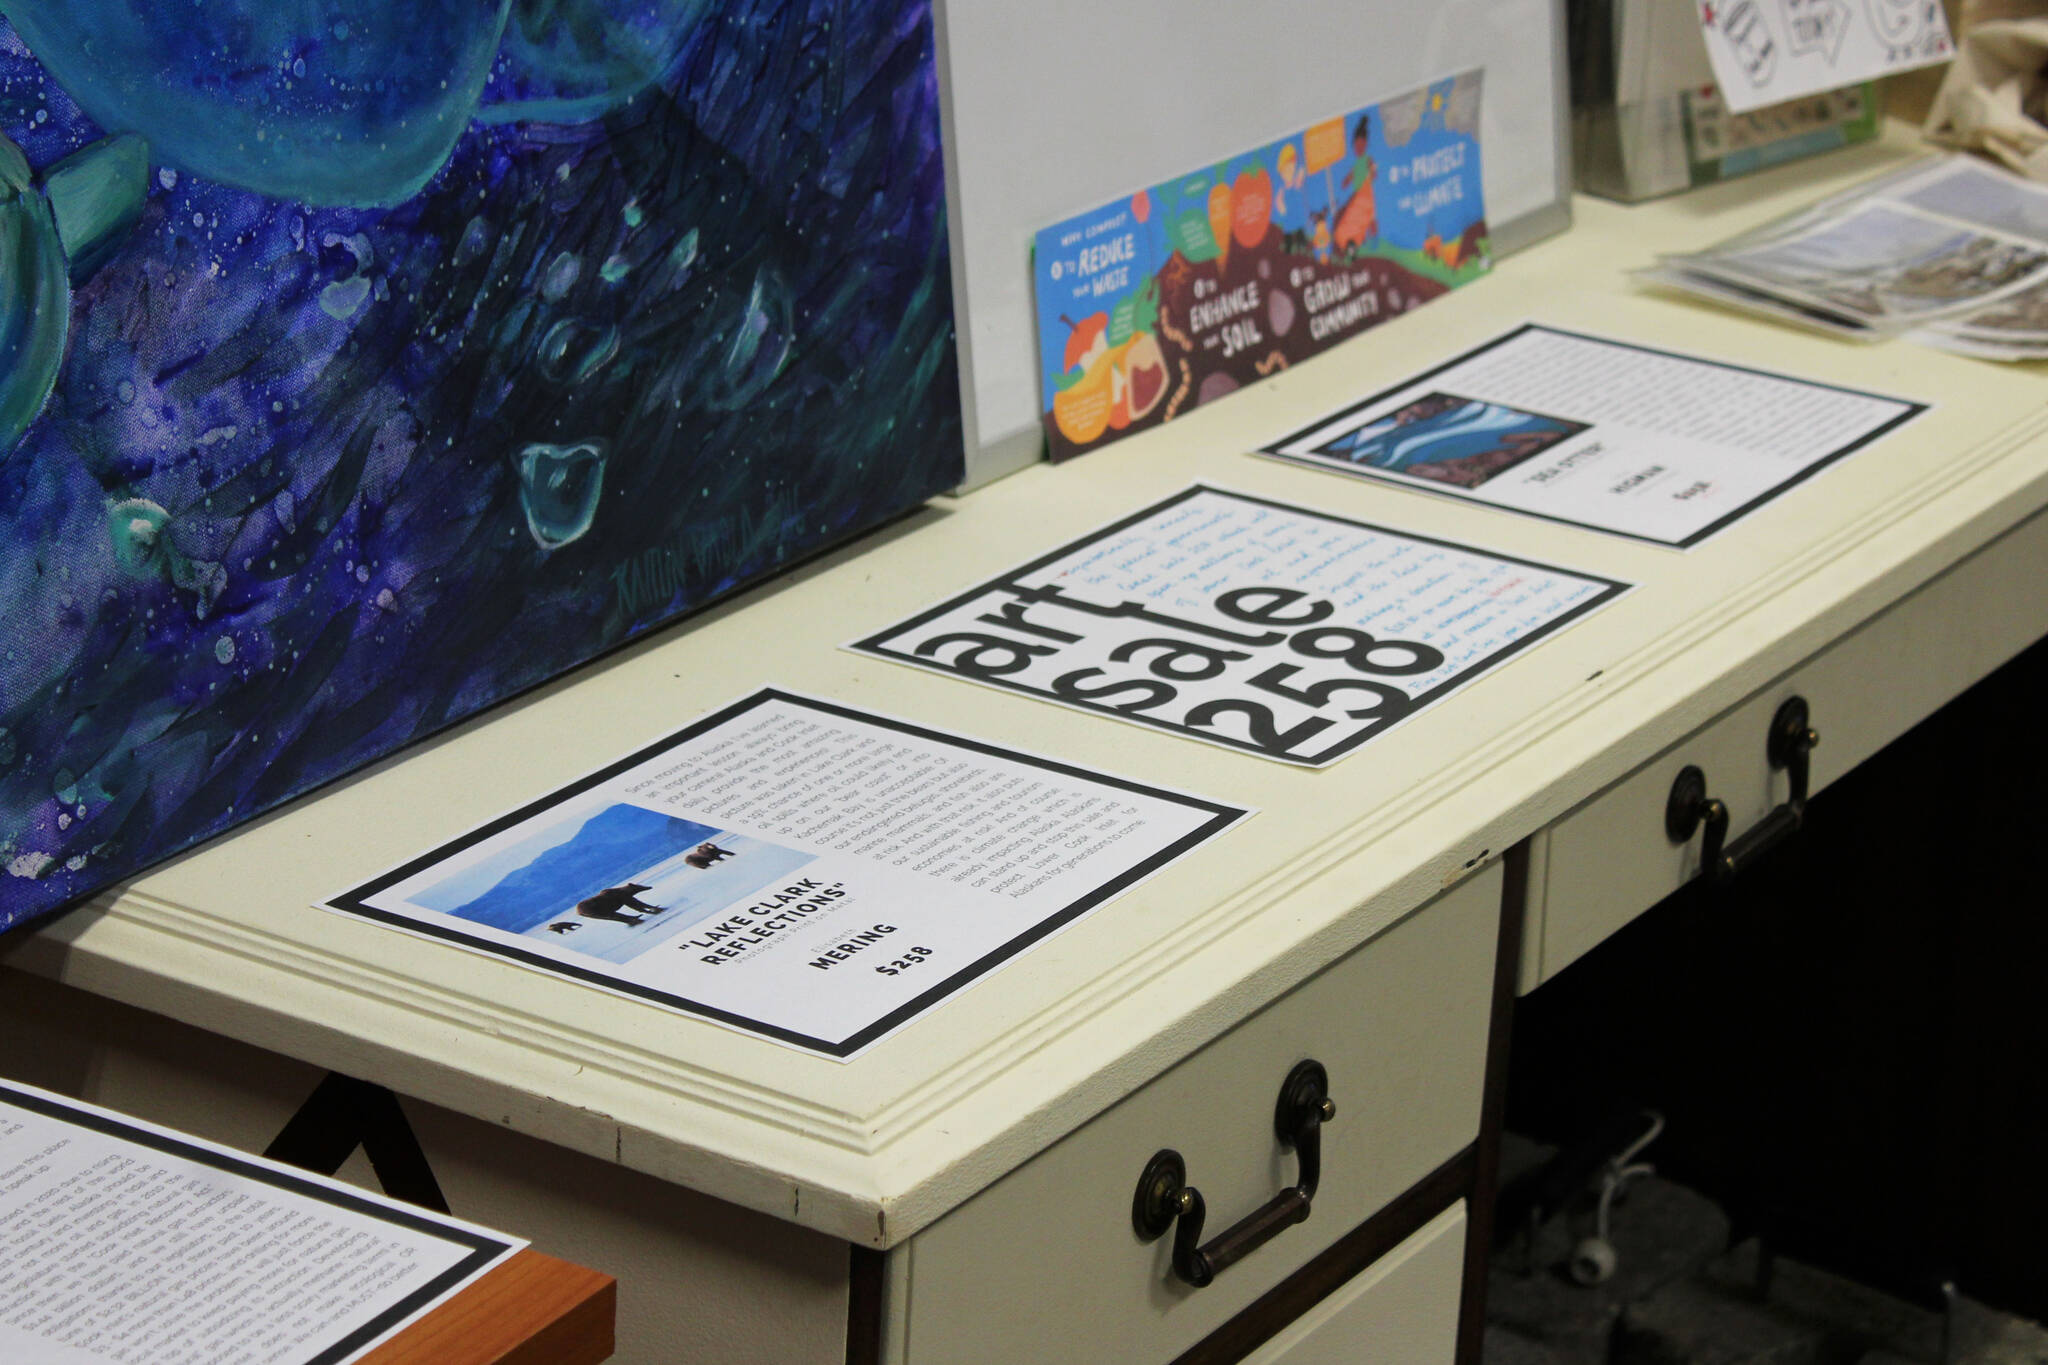 Placards display information and prices for art pieces up for auction as part of "ART Sale 258" at the Cook Inletkeeper Community Action Studio on Thursday, Dec. 9, 2021 in Soldotna, Alaska. (Ashlyn O’Hara/Peninsula Clarion)